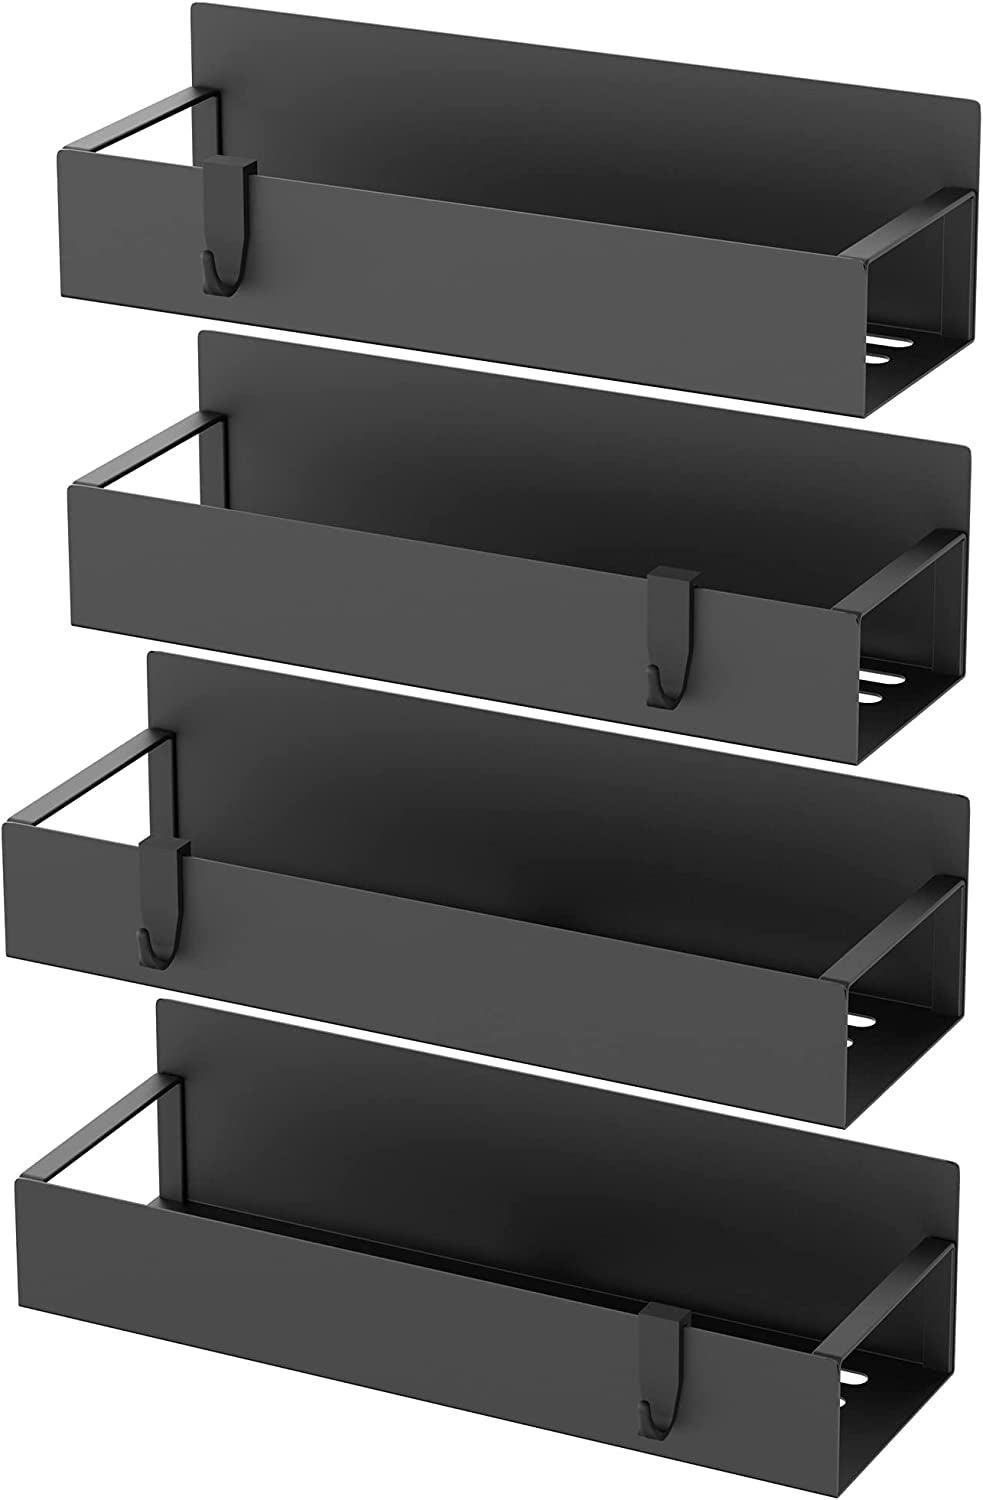 Huggiegems 4 Pack Magnetic Spice Storage Rack Organizer for Refrigerator and Oven, Black Fridge Organizers and Storage